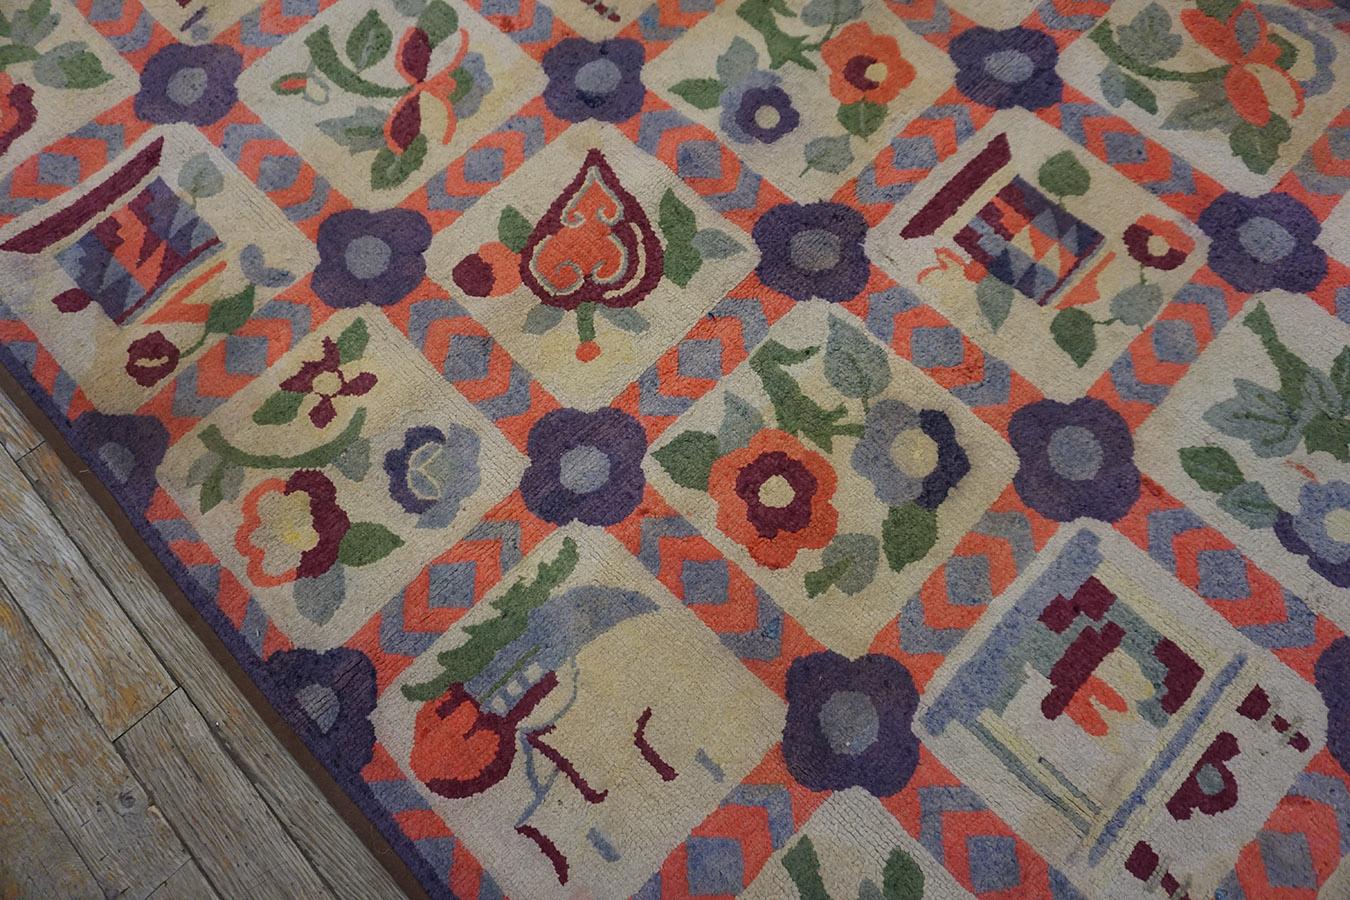 Early 20th Century American Hooked Rug ( 3'9'' x 5'7'' - 114 x 170 ) For Sale 4